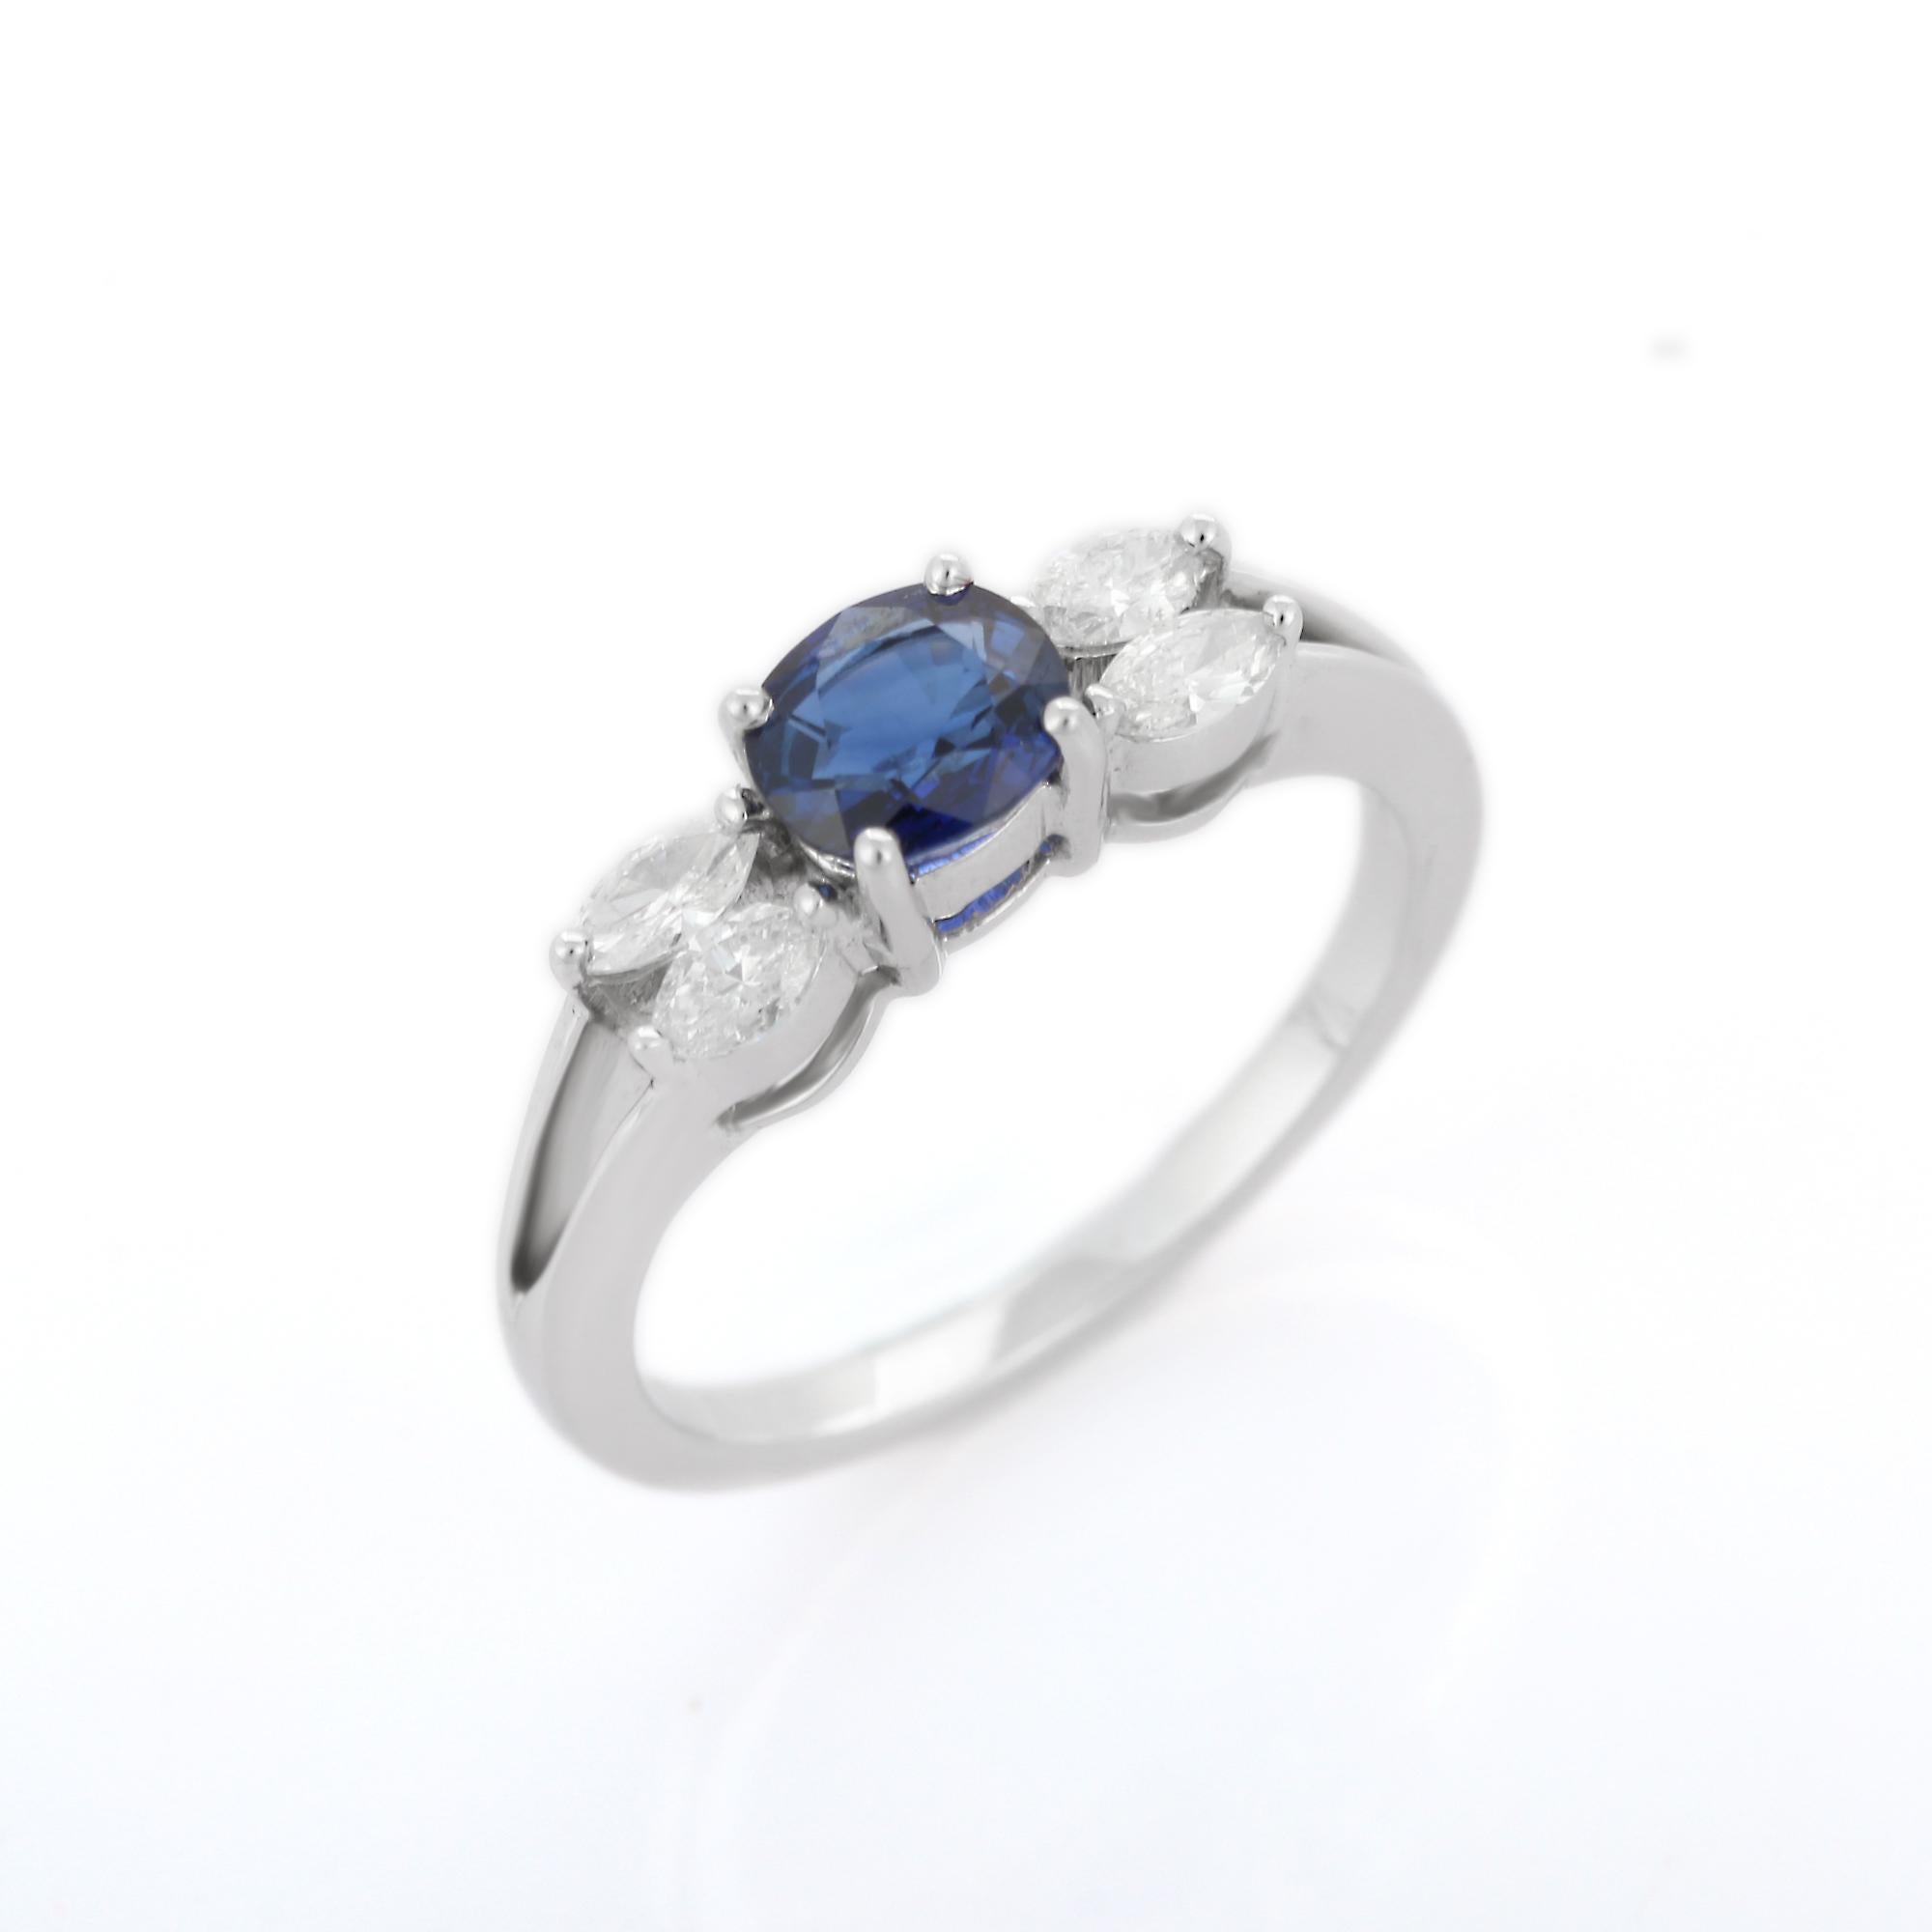 For Sale:  Natural Brilliant Marquise Cut Diamond Blue Sapphire Ring in 18K White Gold 5